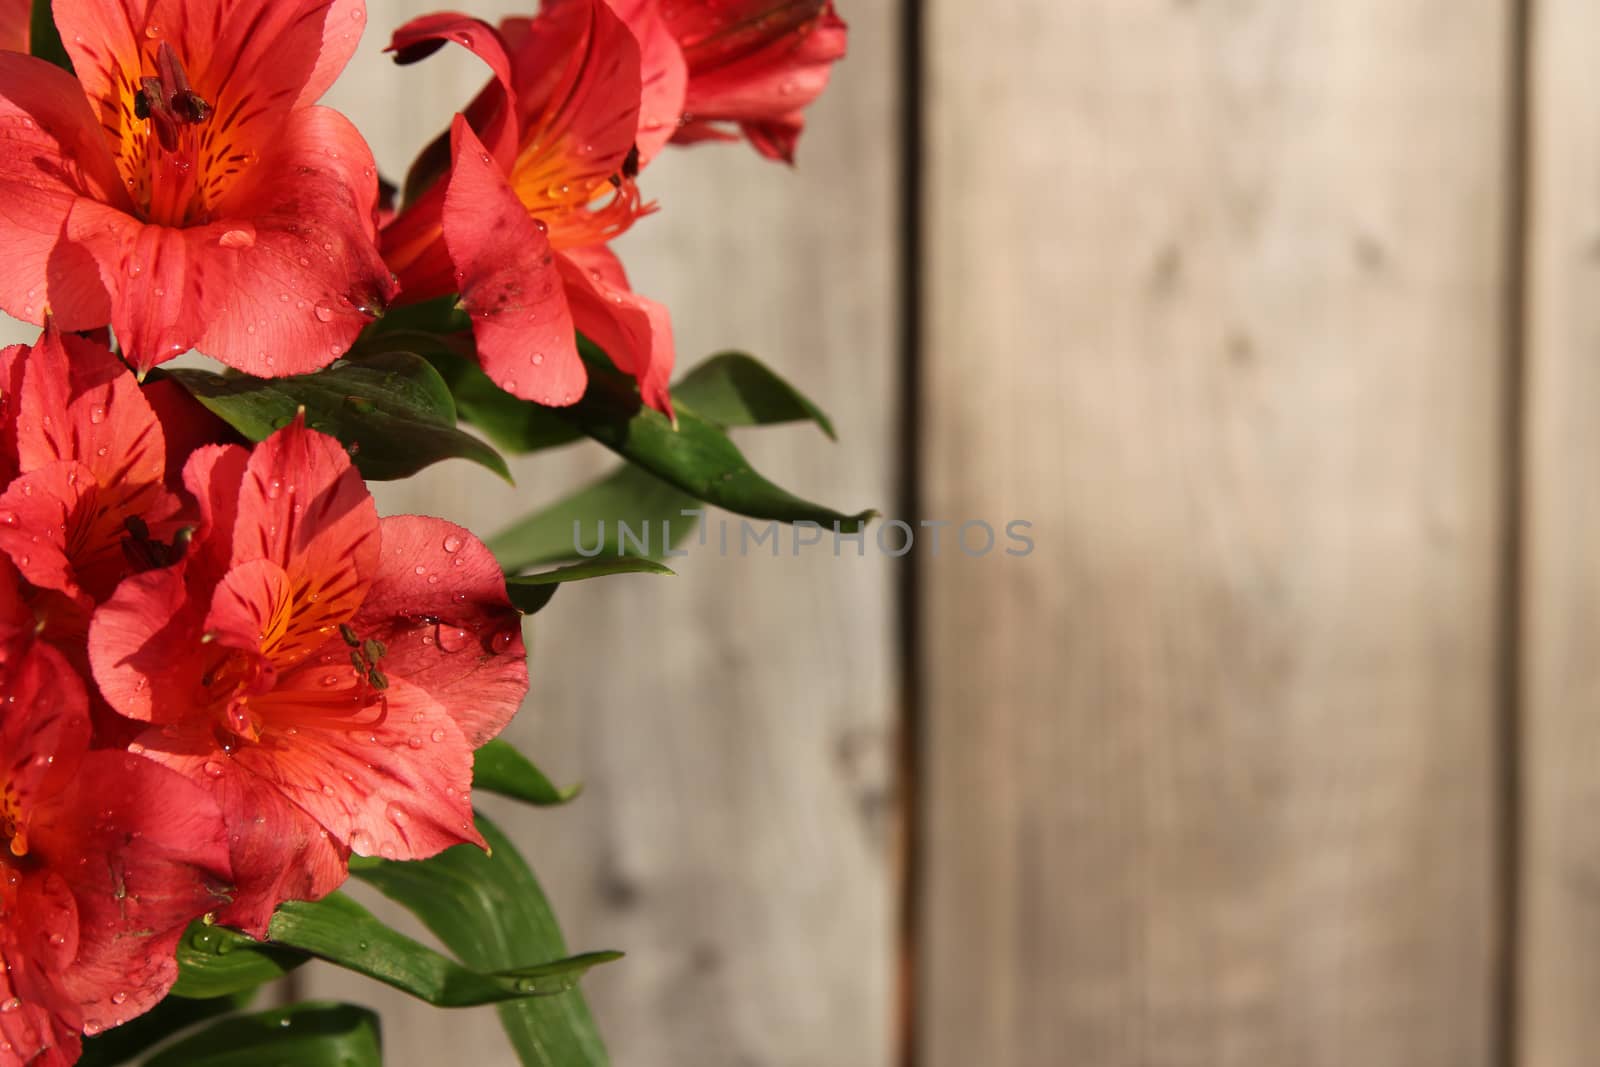 Pink Peruvian Lily on wooden background by gvictoria